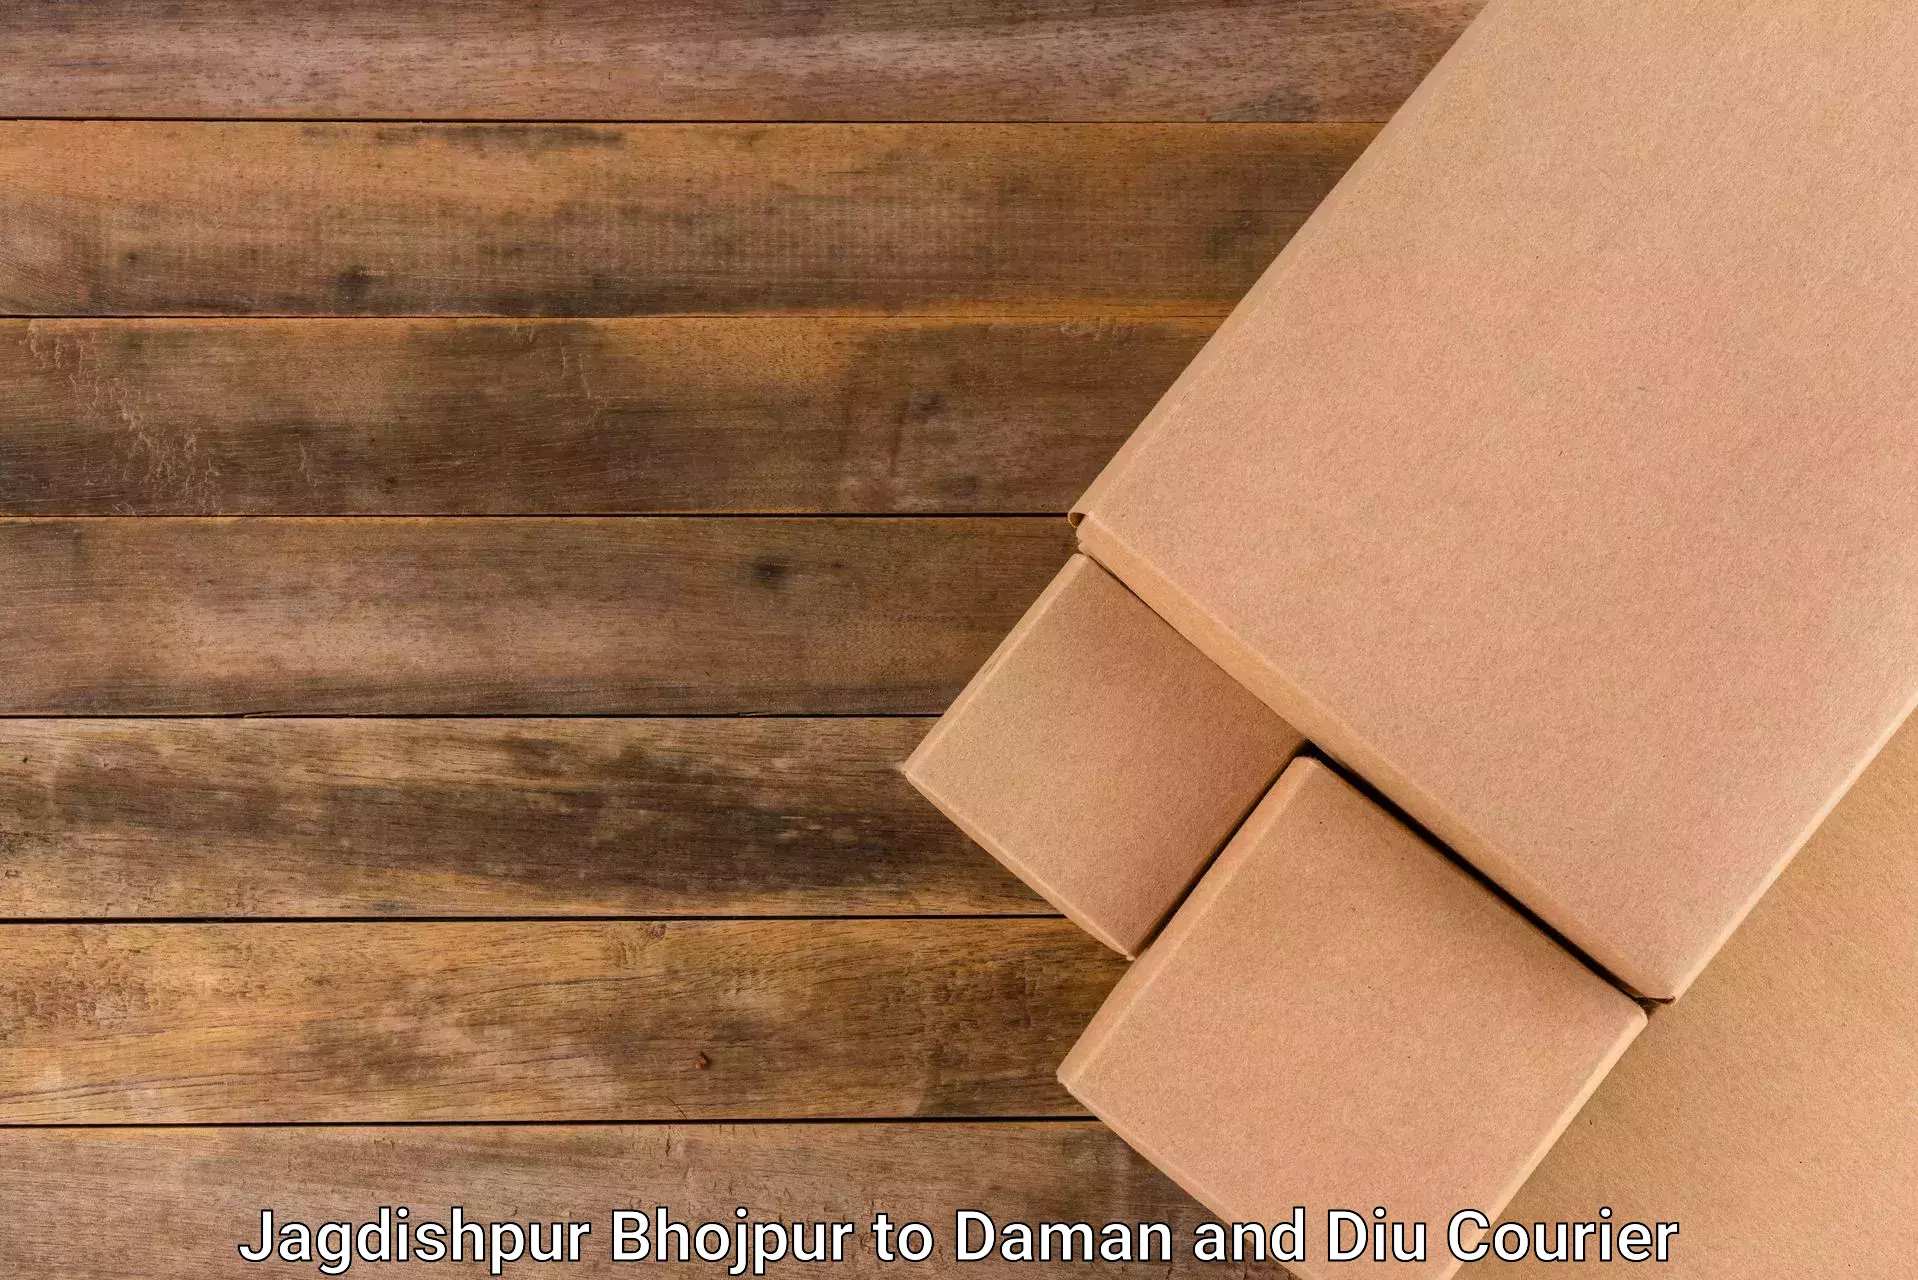 Expedited parcel delivery in Jagdishpur Bhojpur to Diu